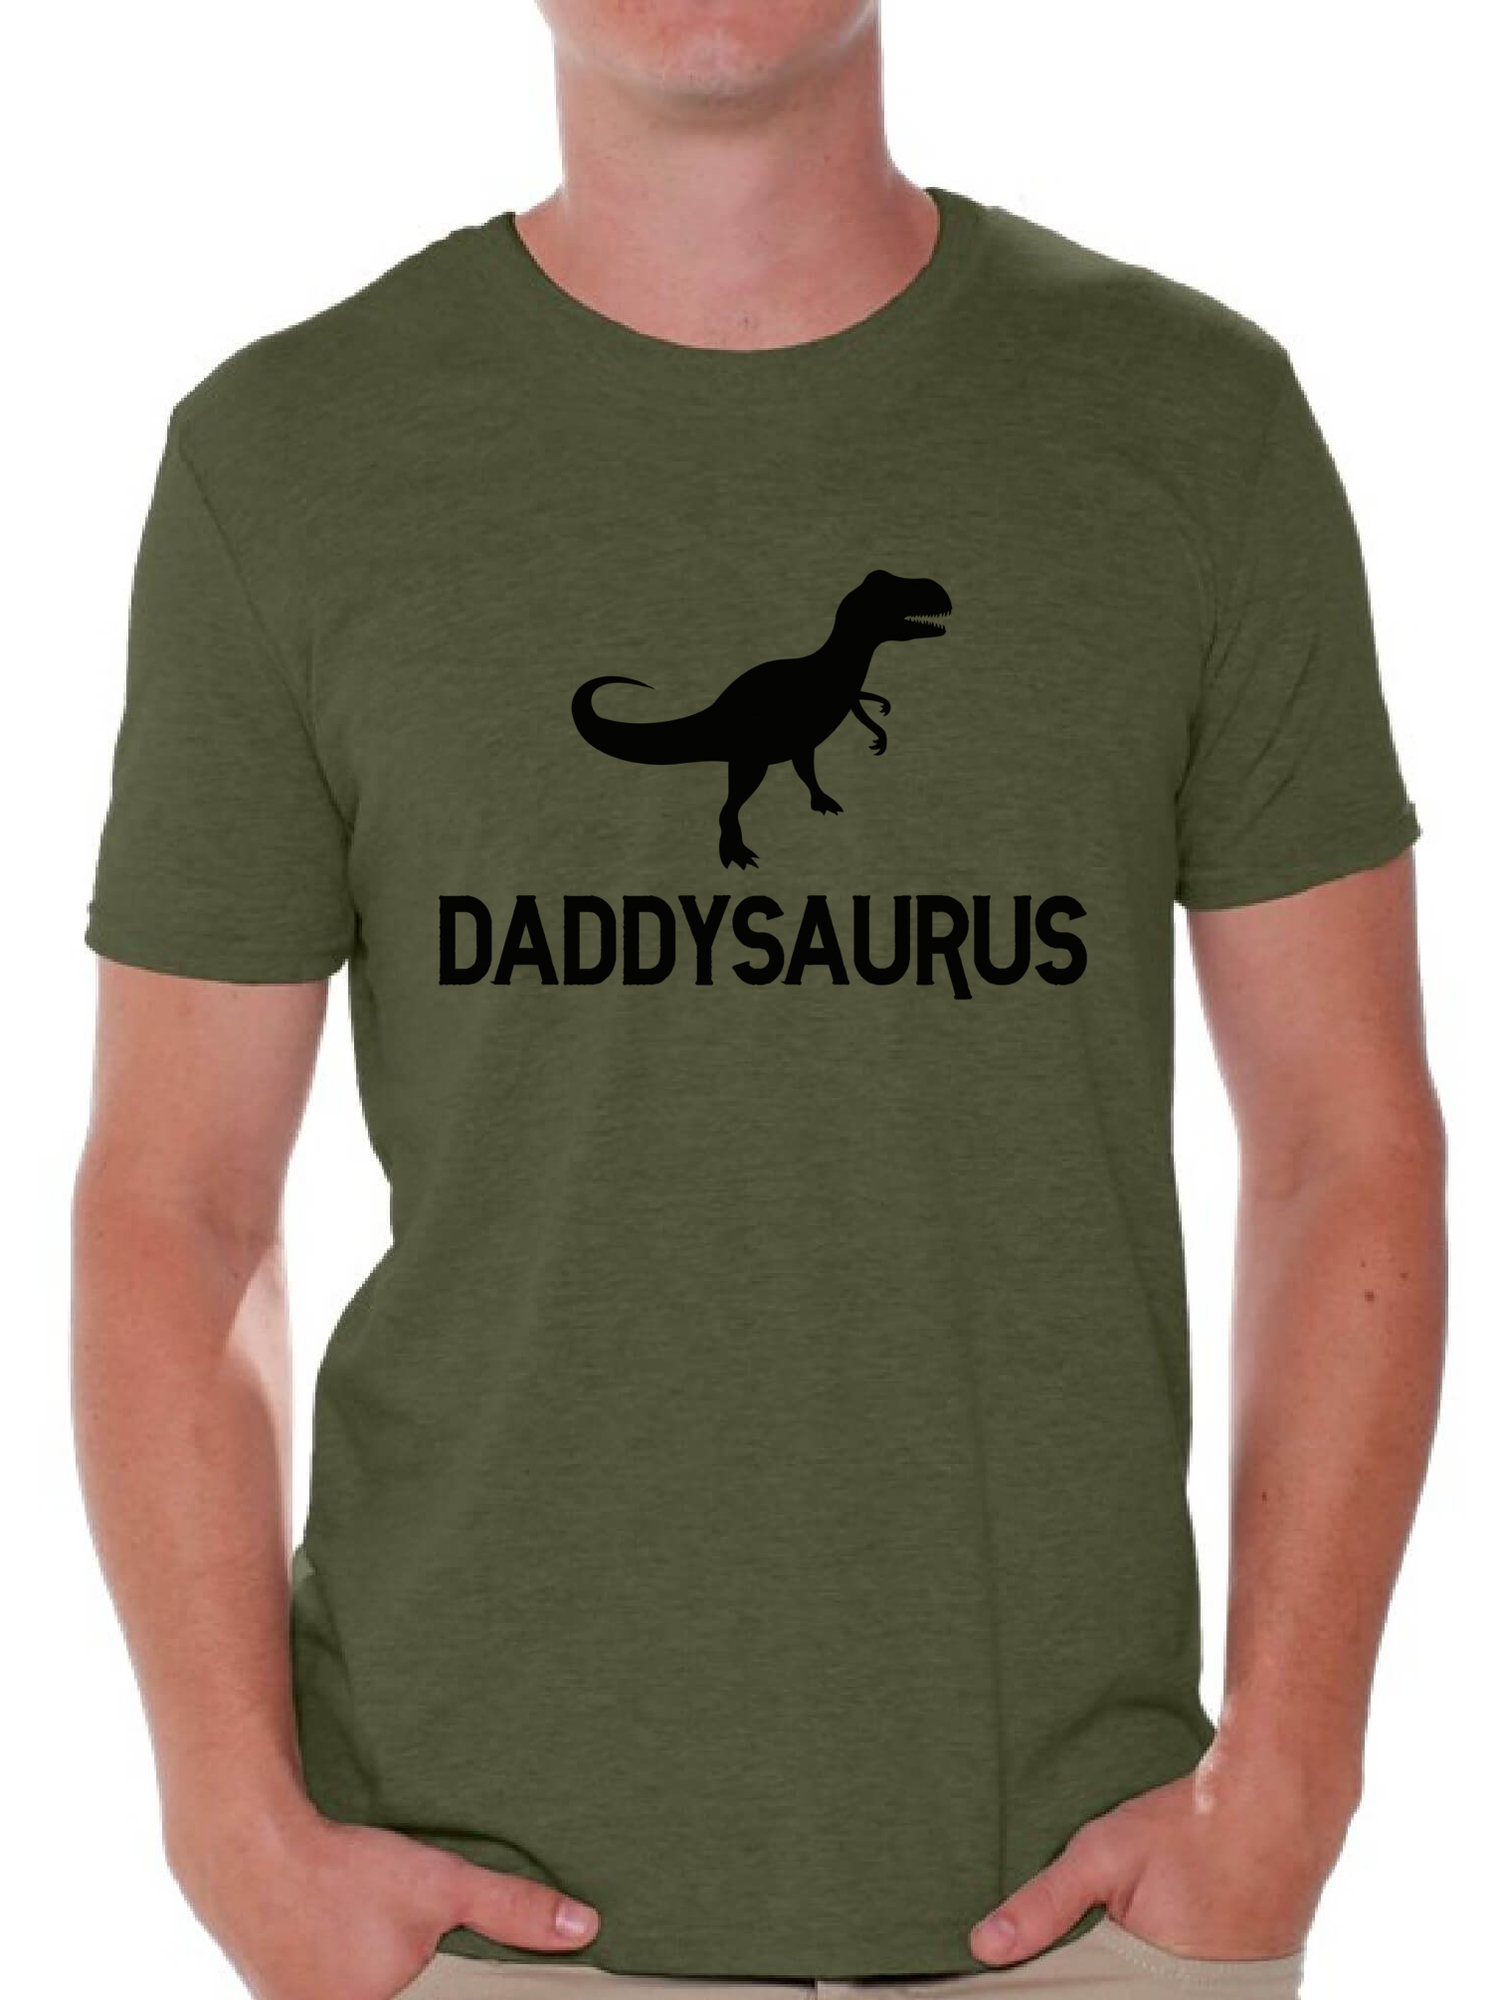 Awkward Styles Men's Daddysaurus Funny Graphic T-shirt Tops Black Daddy Saurus Gift for Dad - image 1 of 4